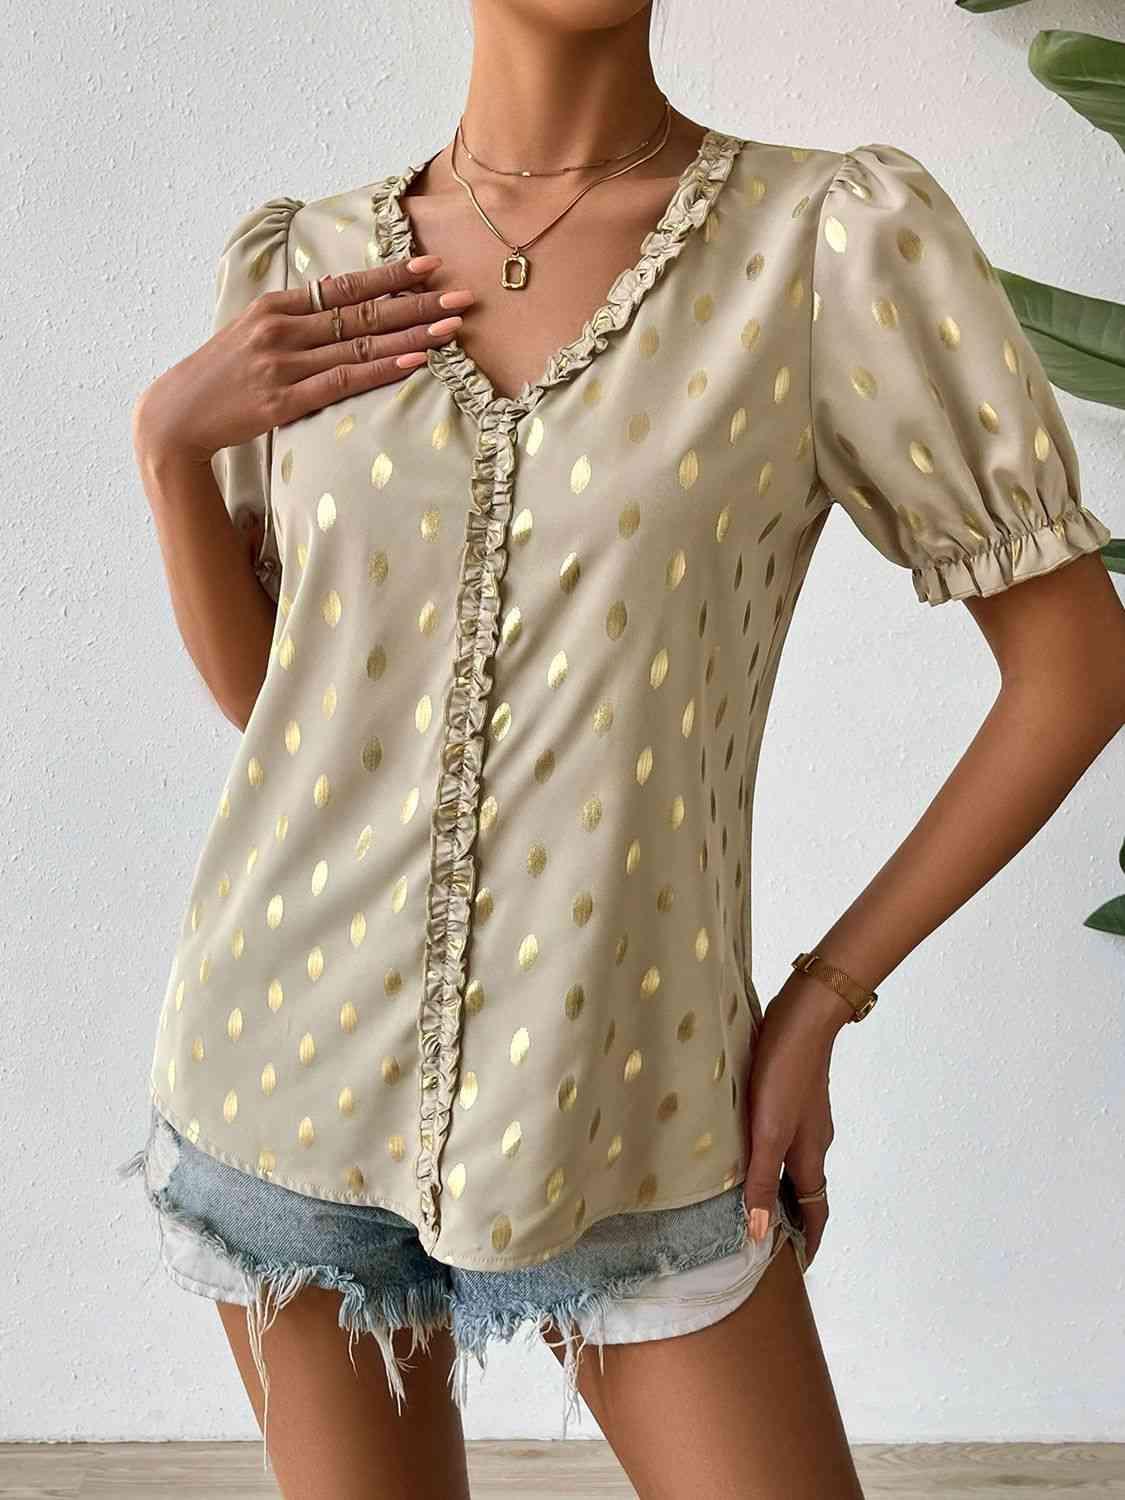 a woman wearing a blouse with gold polka dots